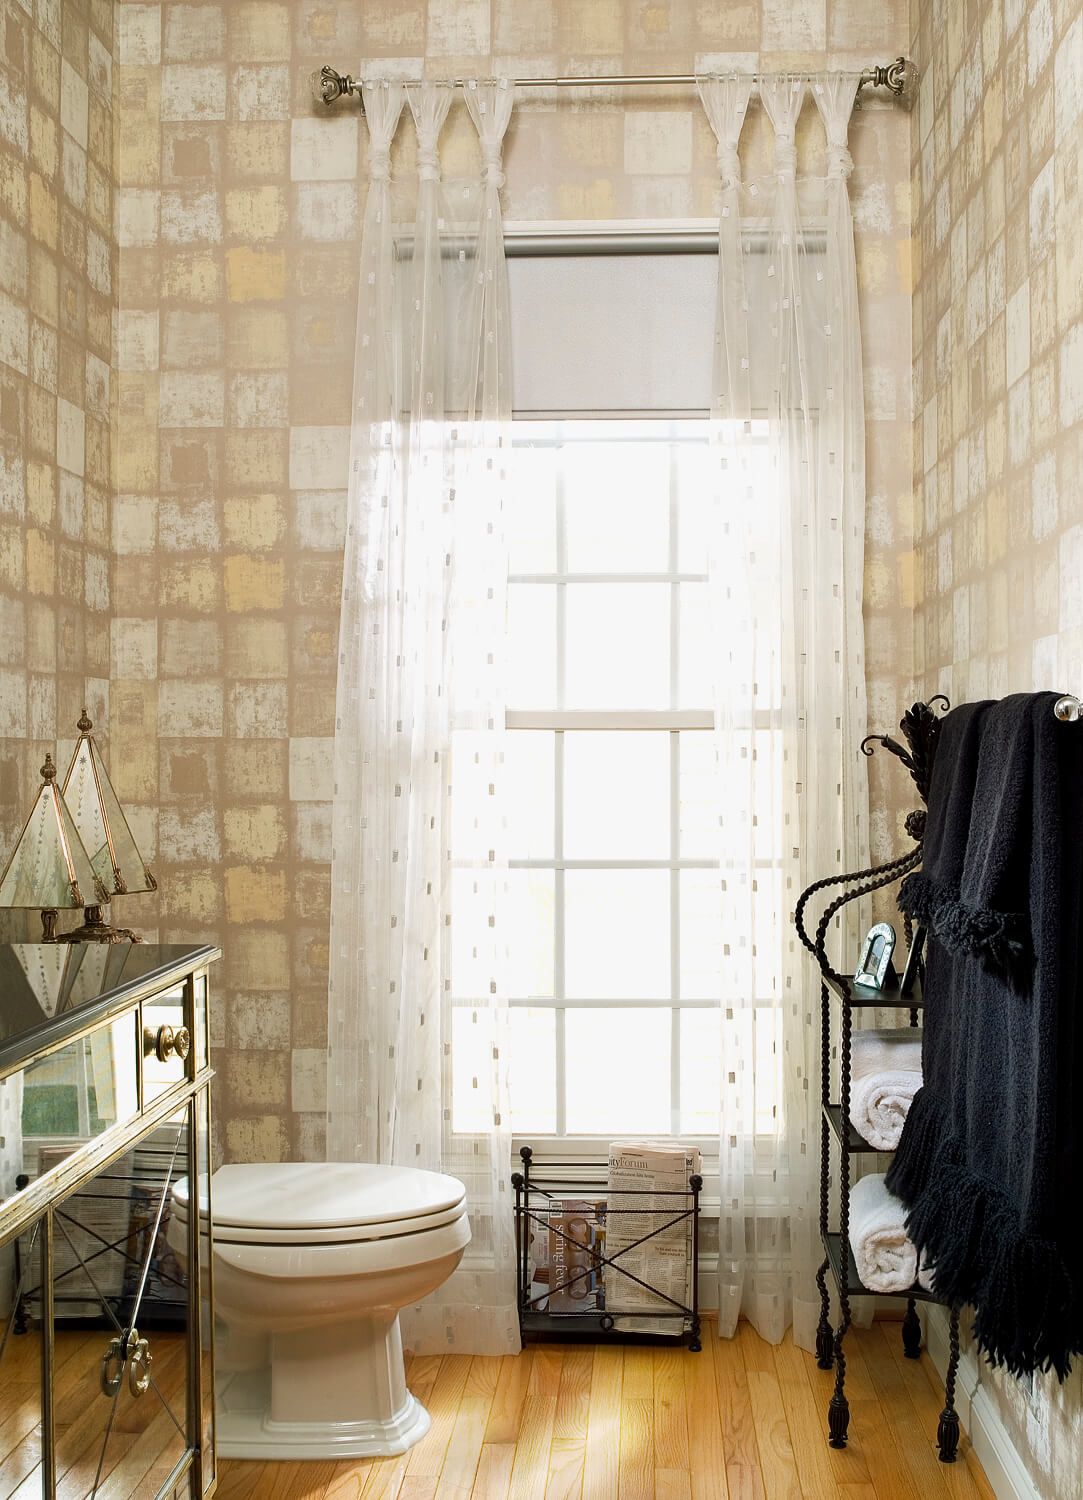 A Powder Room With a Touch Of Sparkle And Glam